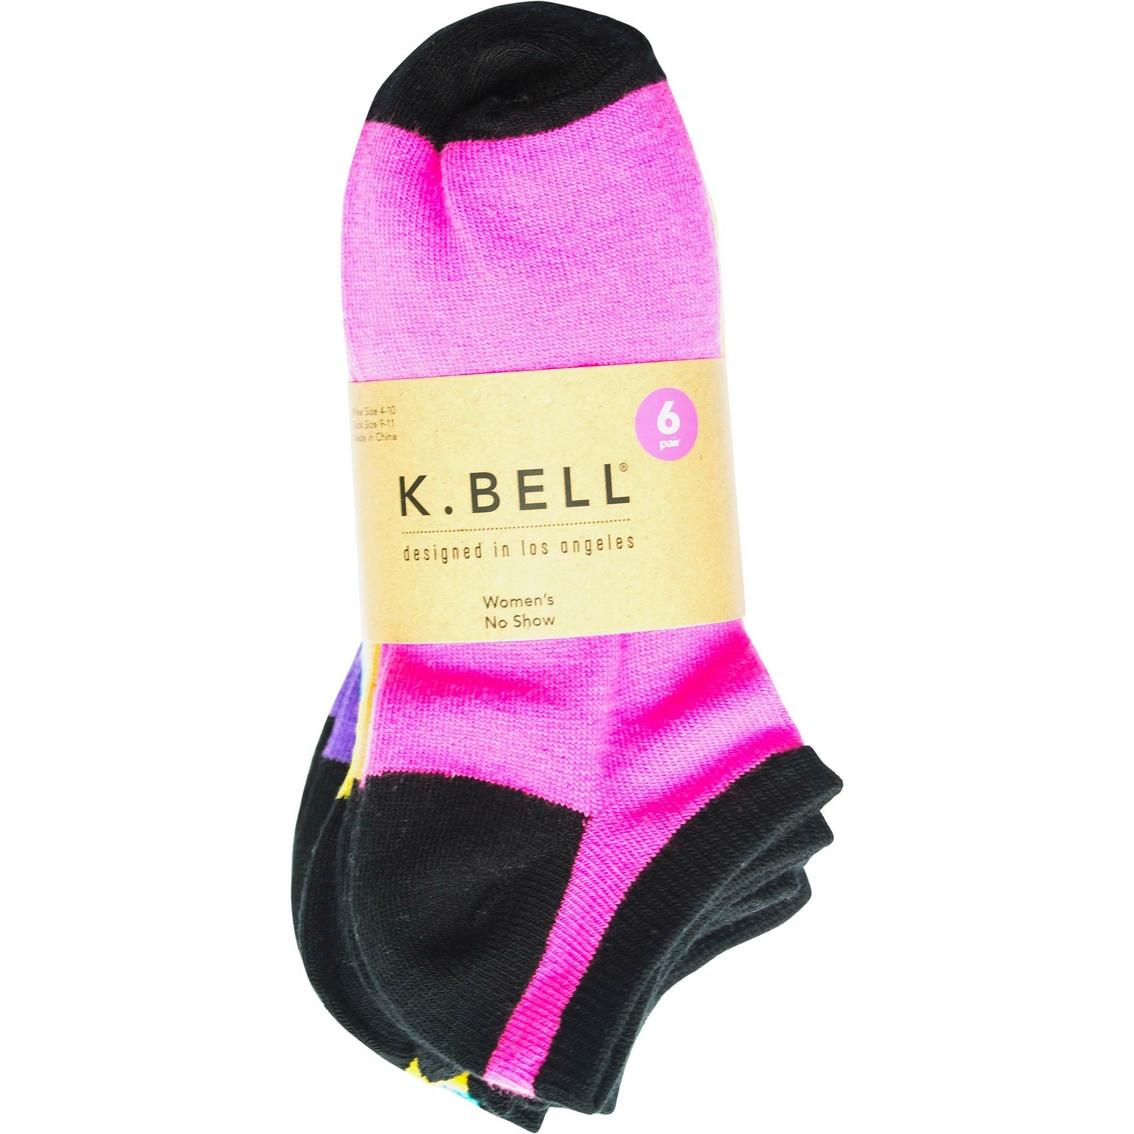 K. Bell Solid Neon No Show Socks 6 Pk. - Image 2 of 2